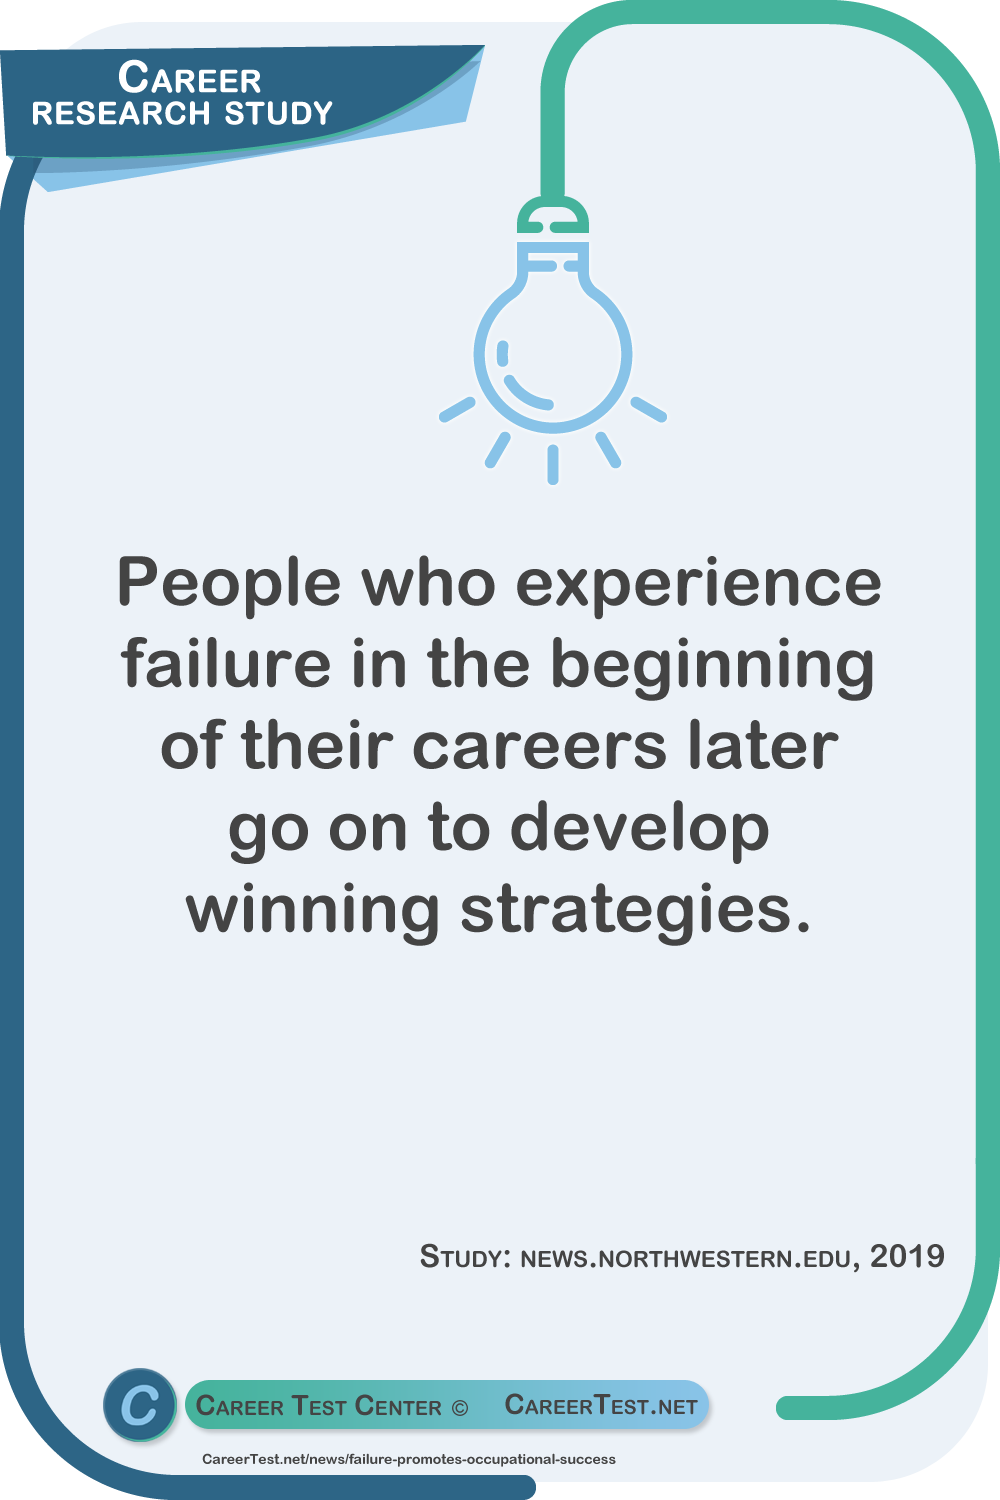 People who experience failure in the beginning of their careers later go on to develop winning strategies. Study: news.northwestern.edu, 2019.